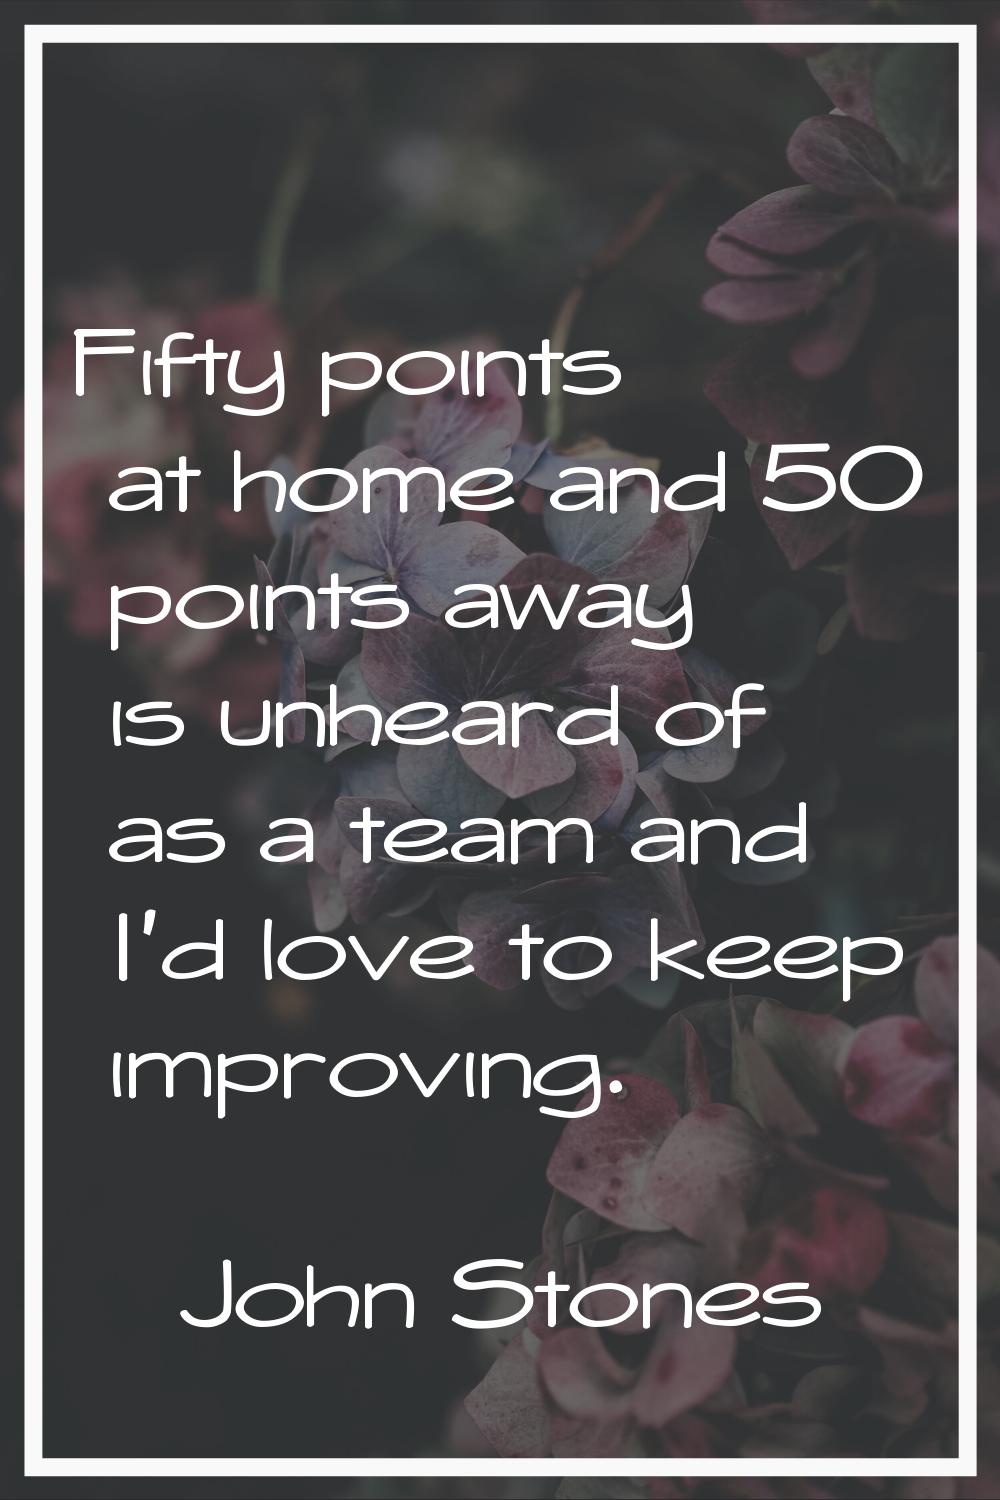 Fifty points at home and 50 points away is unheard of as a team and I'd love to keep improving.